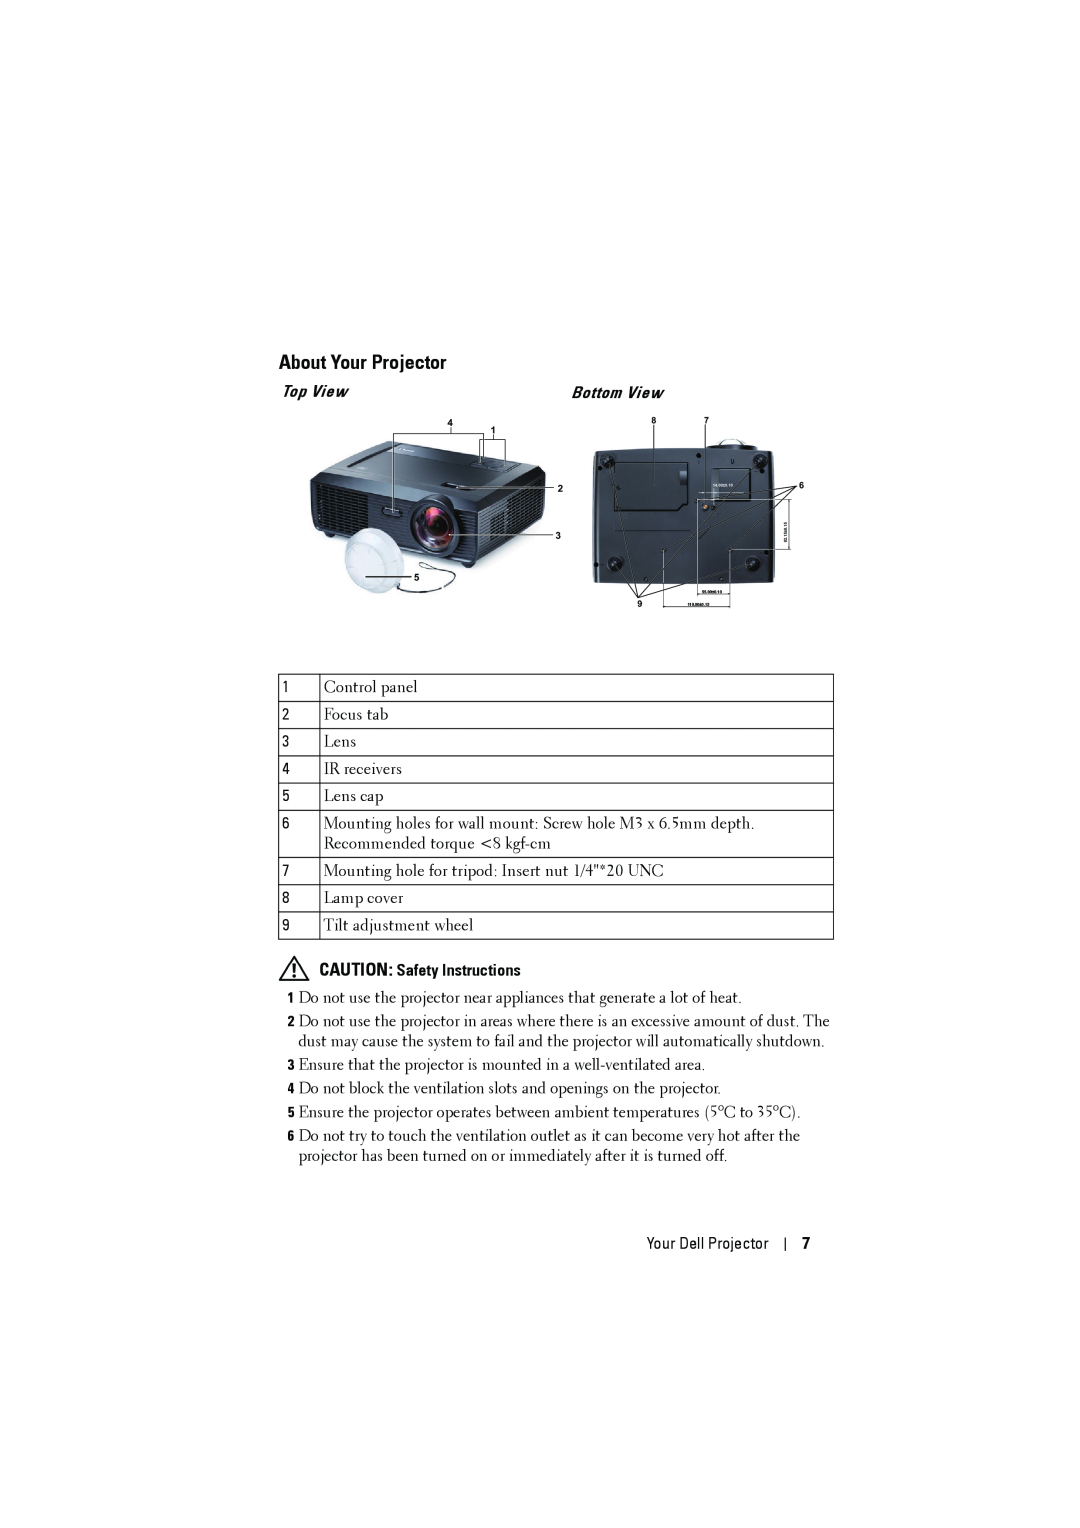 Dell S300 manual About Your Projector, Top View, Bottom View, CAUTION Safety Instructions 